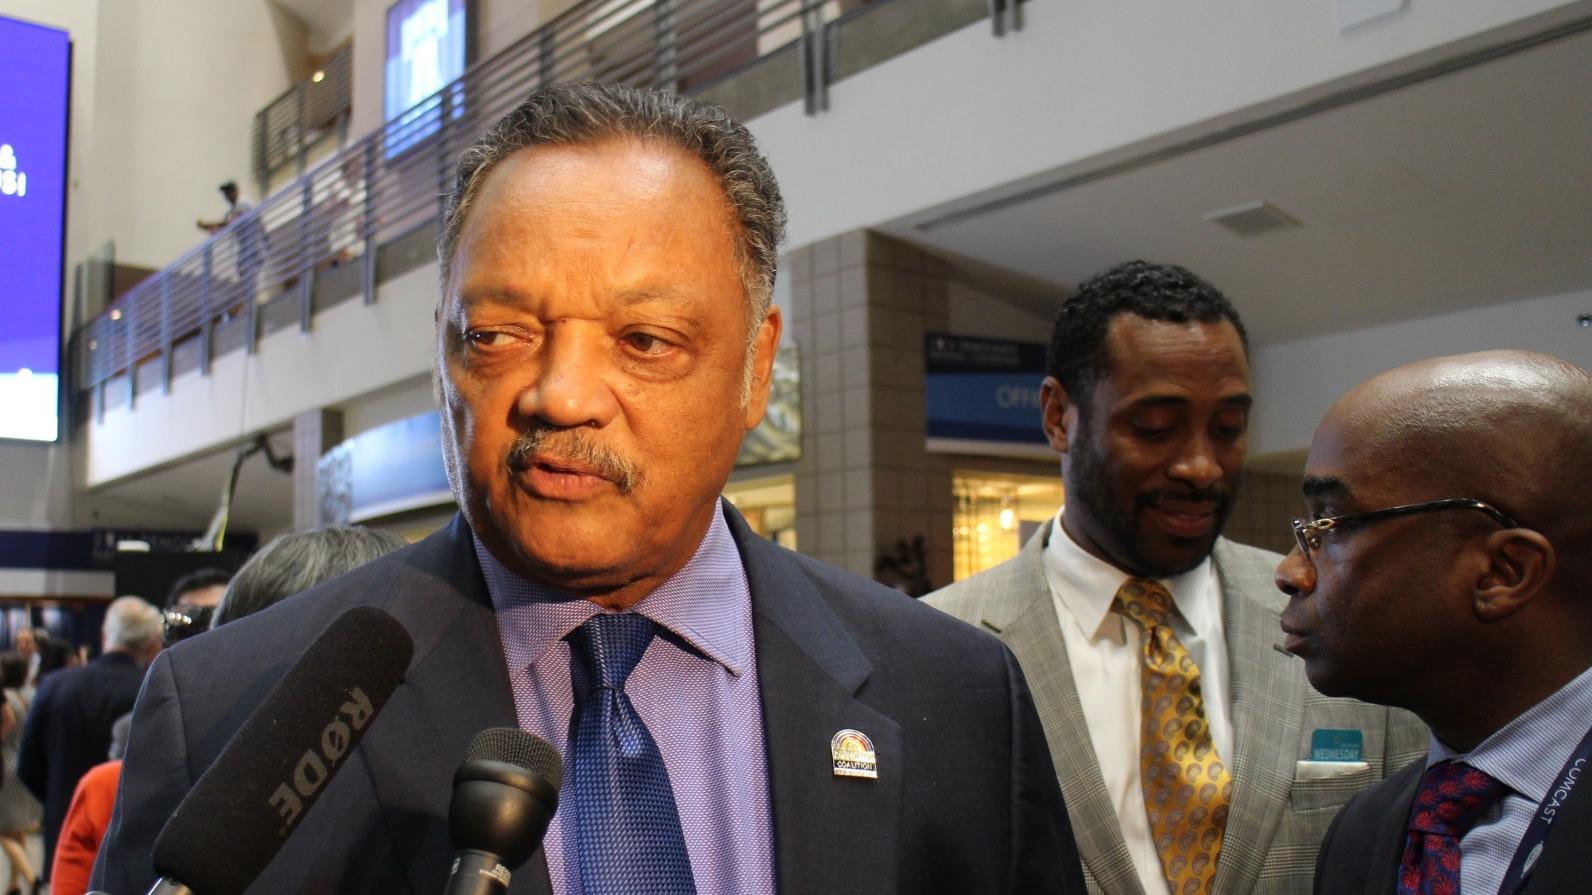 Rev. Jesse Jackson this week endorsed Hillary Clinton at the Democratic Convention in Philadelphia